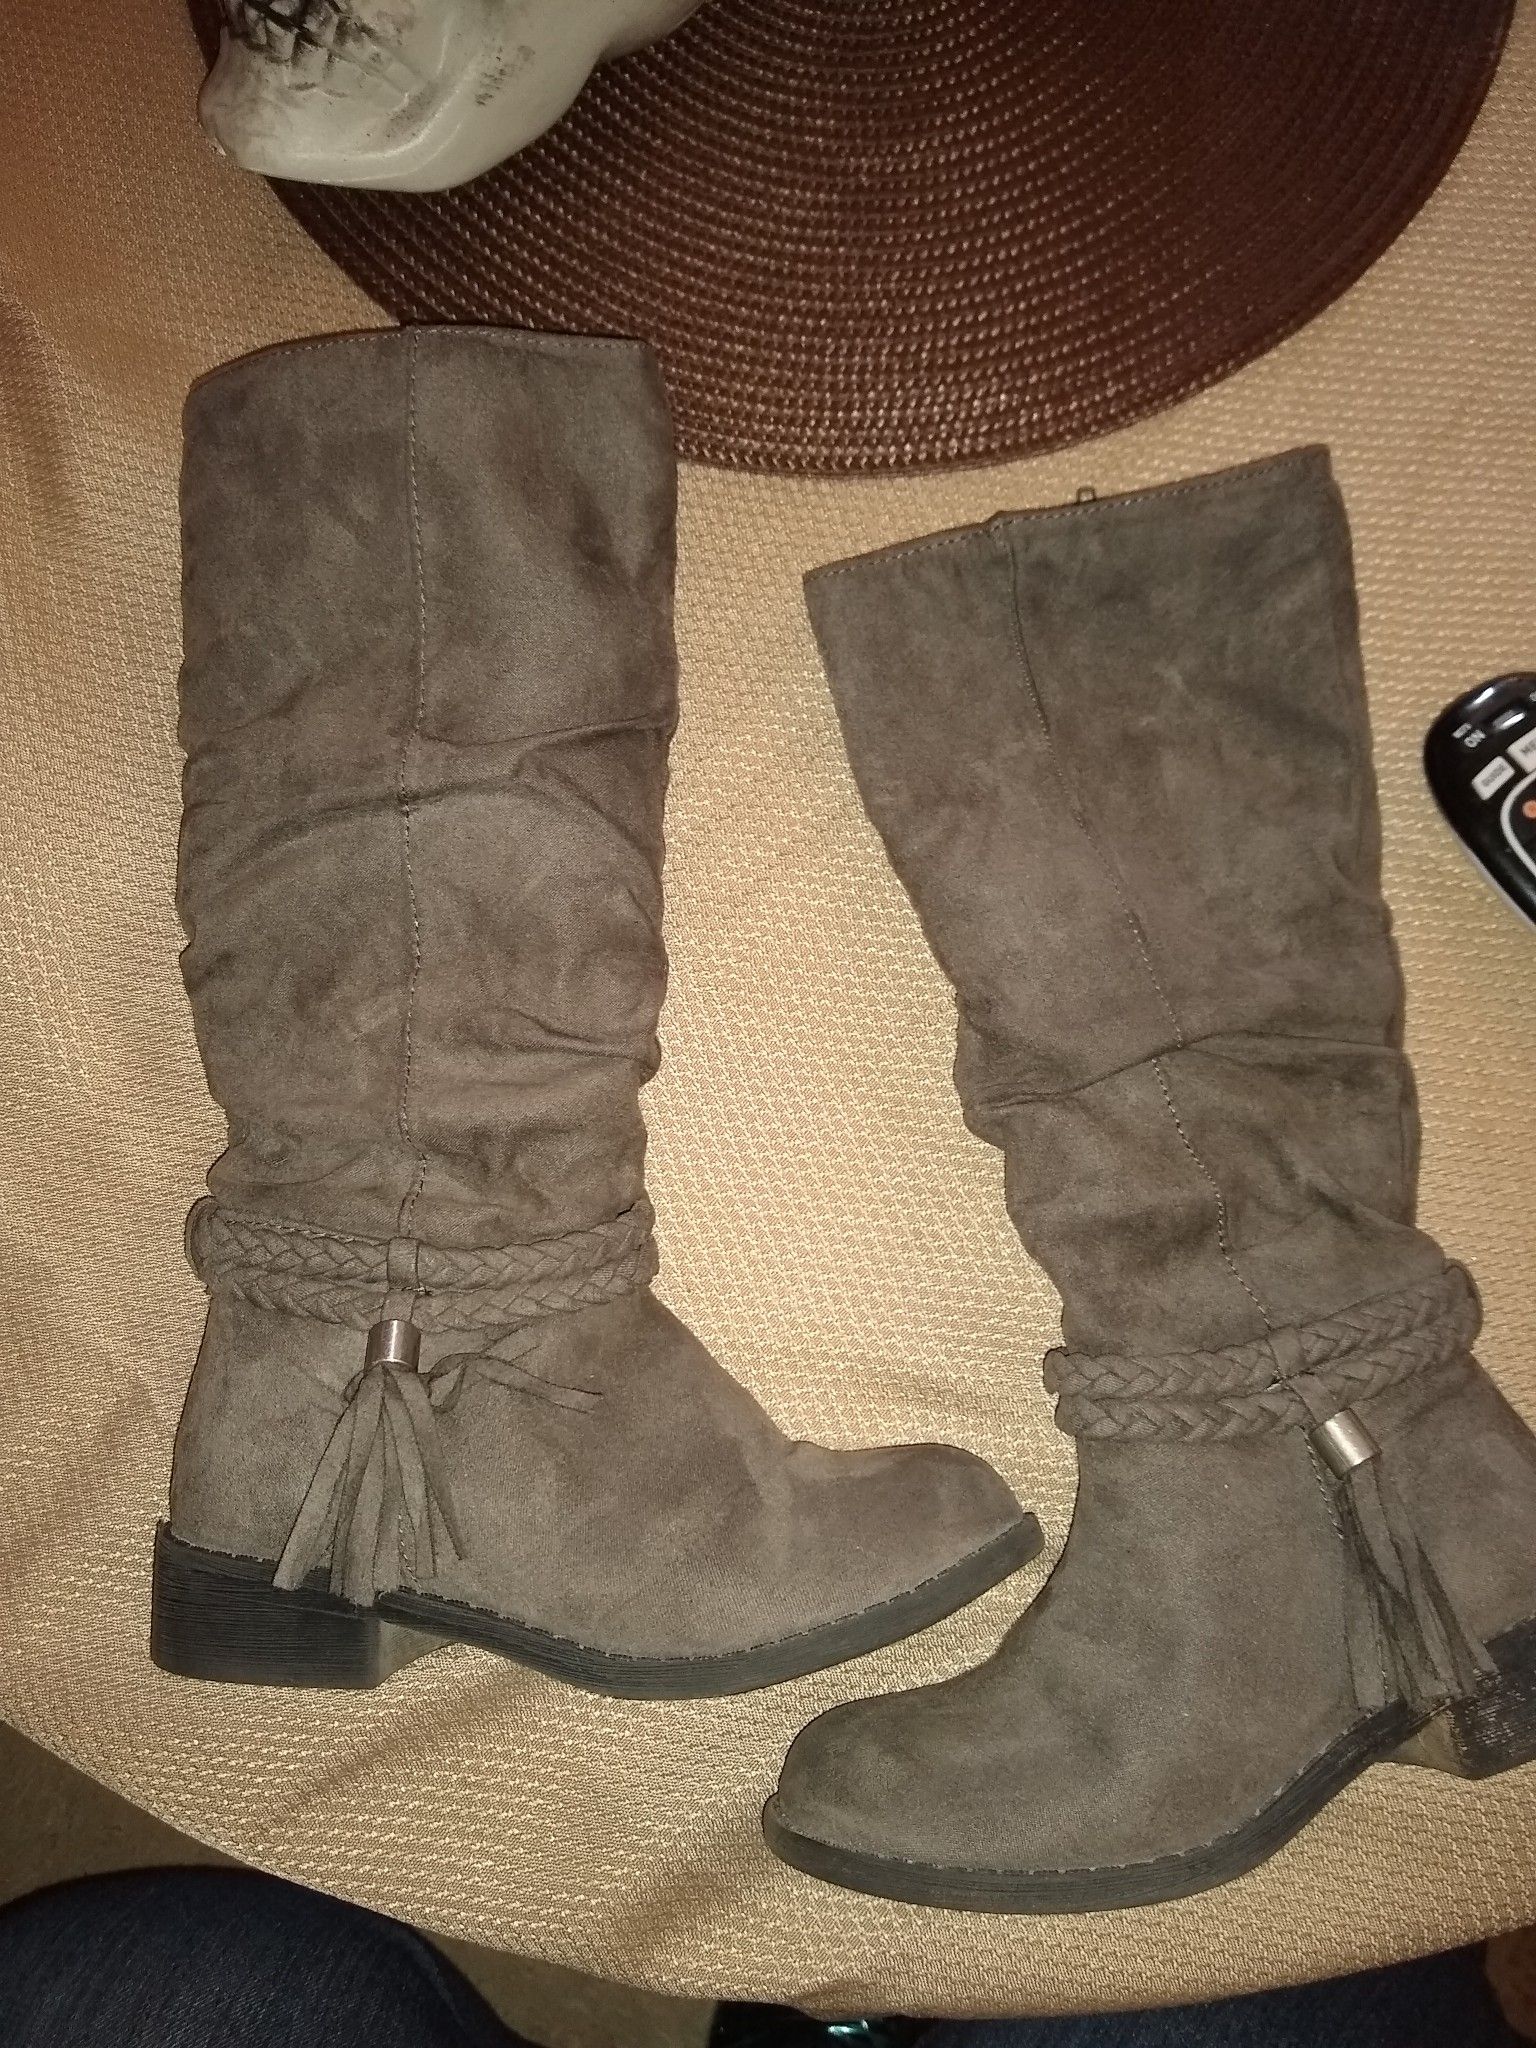 Girls Size 12 boots